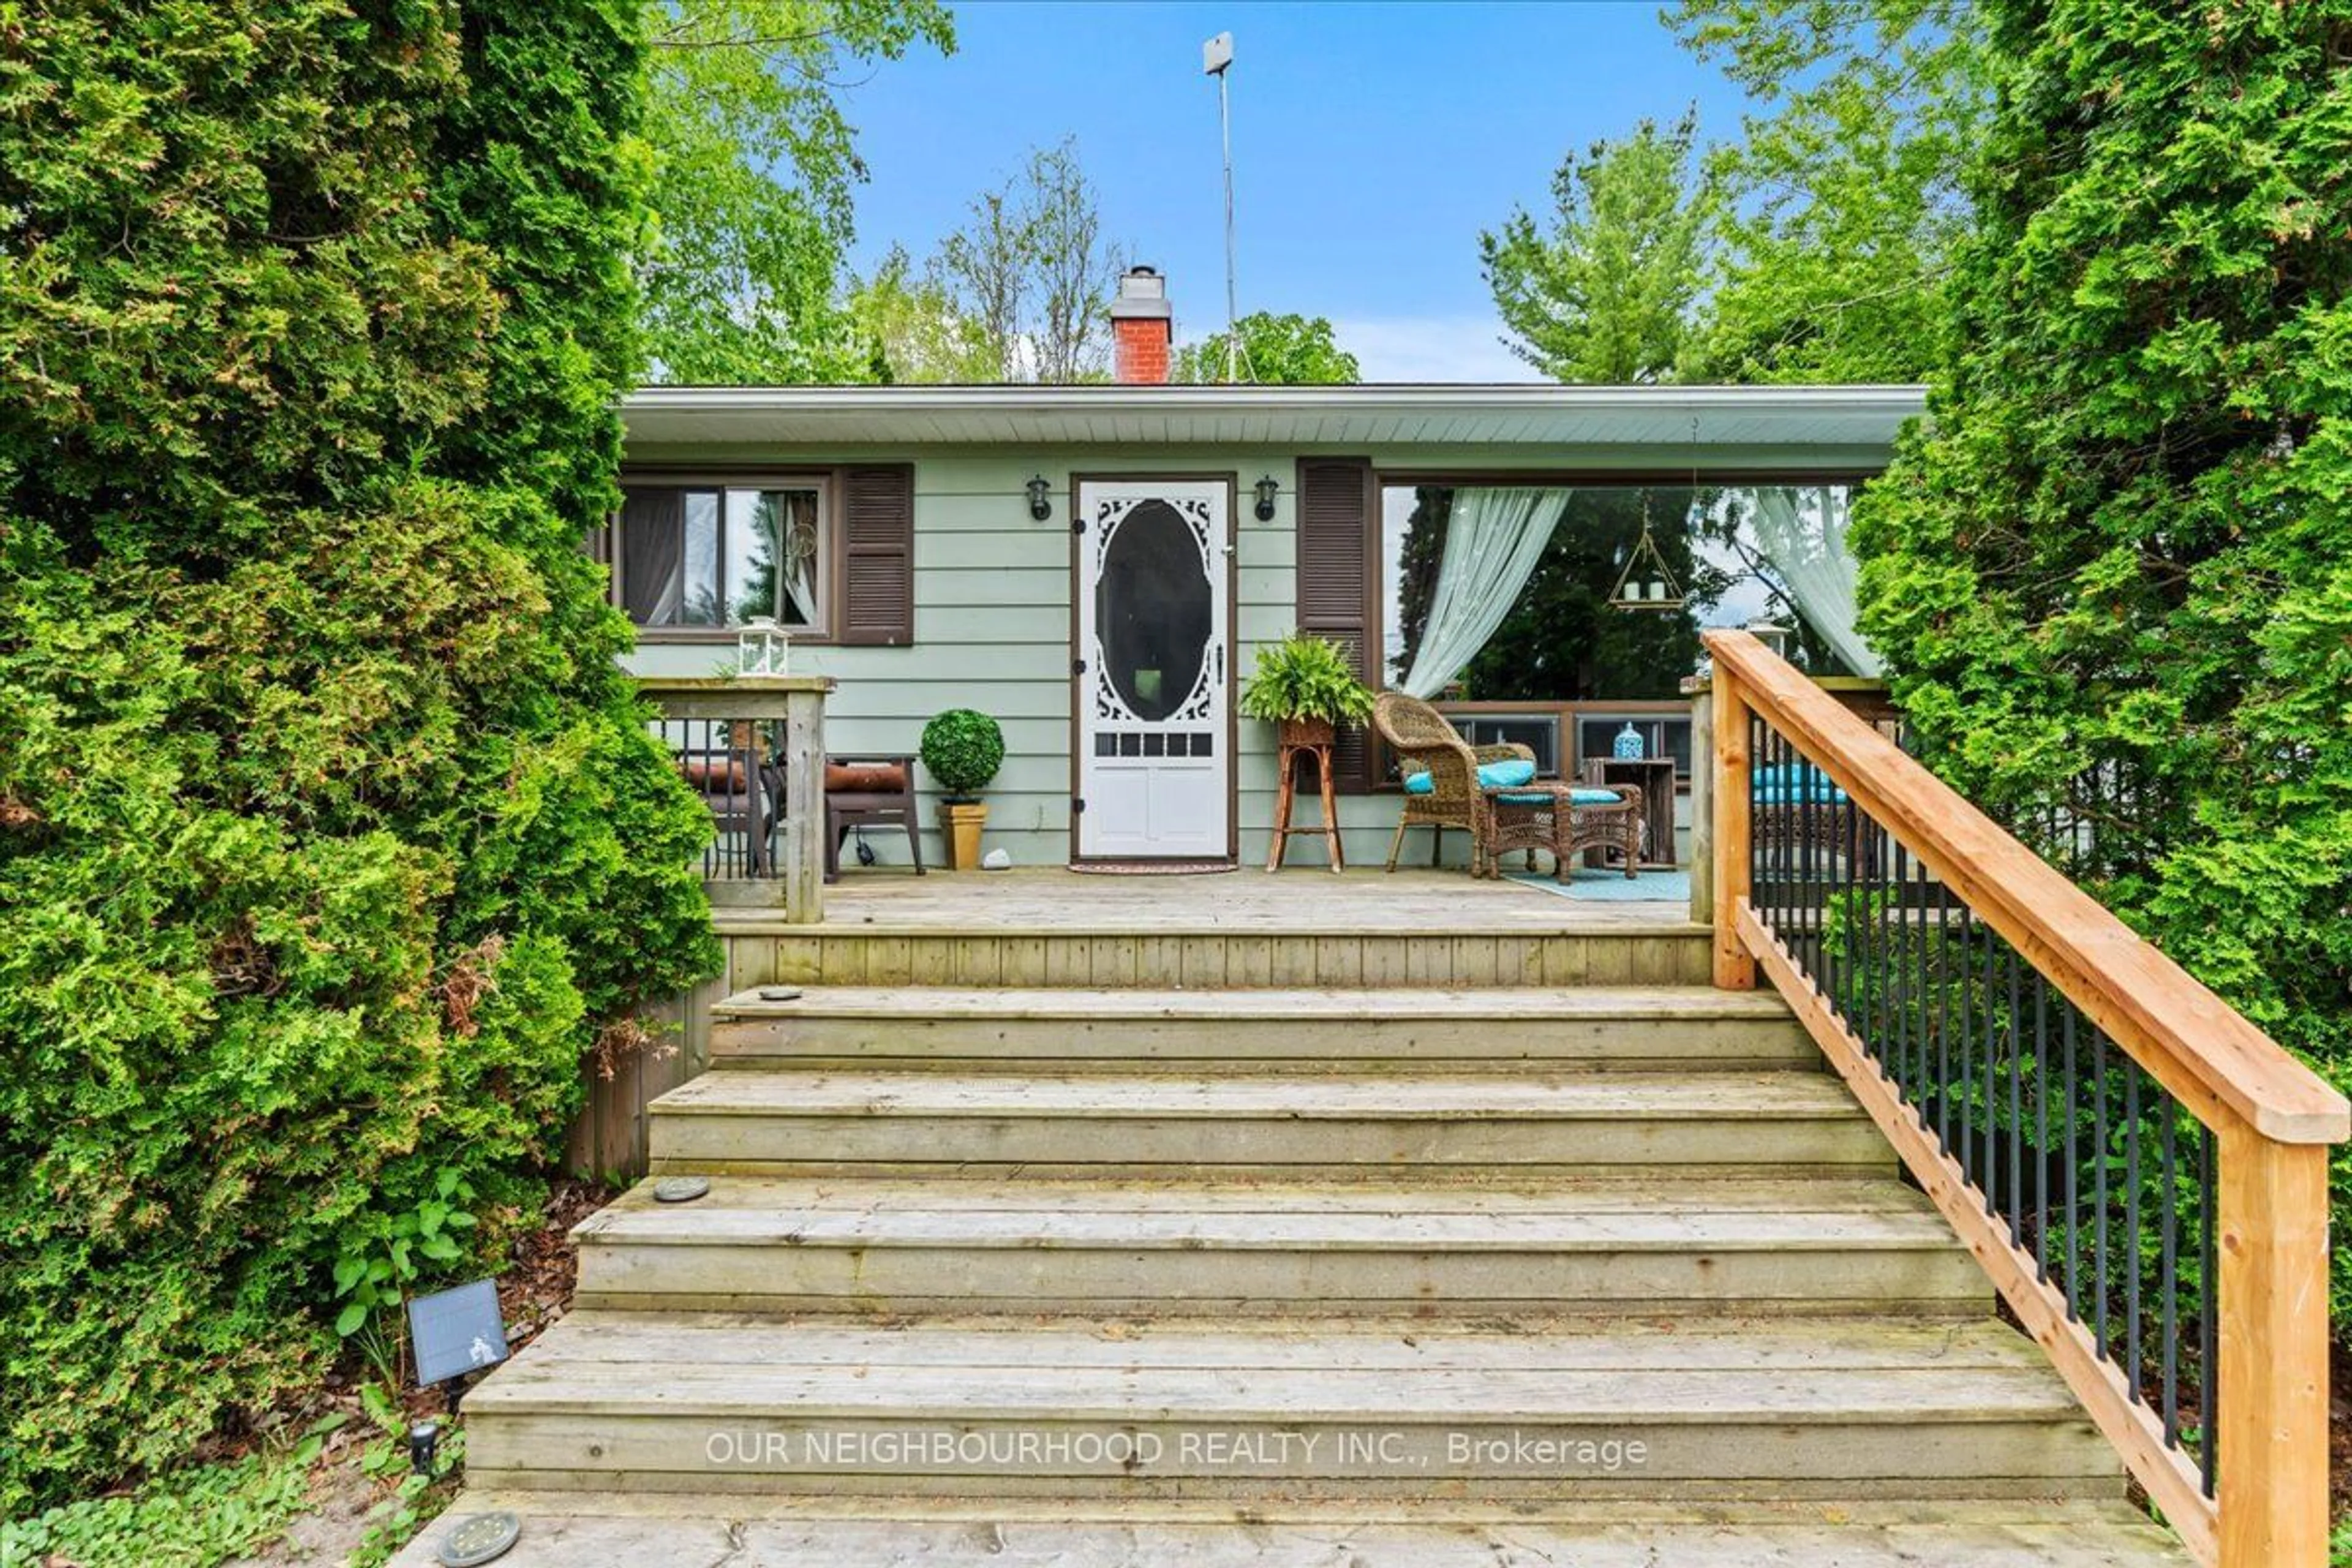 Cottage for 20 Lakeshore Rd, Marmora and Lake Ontario K0K 2M0